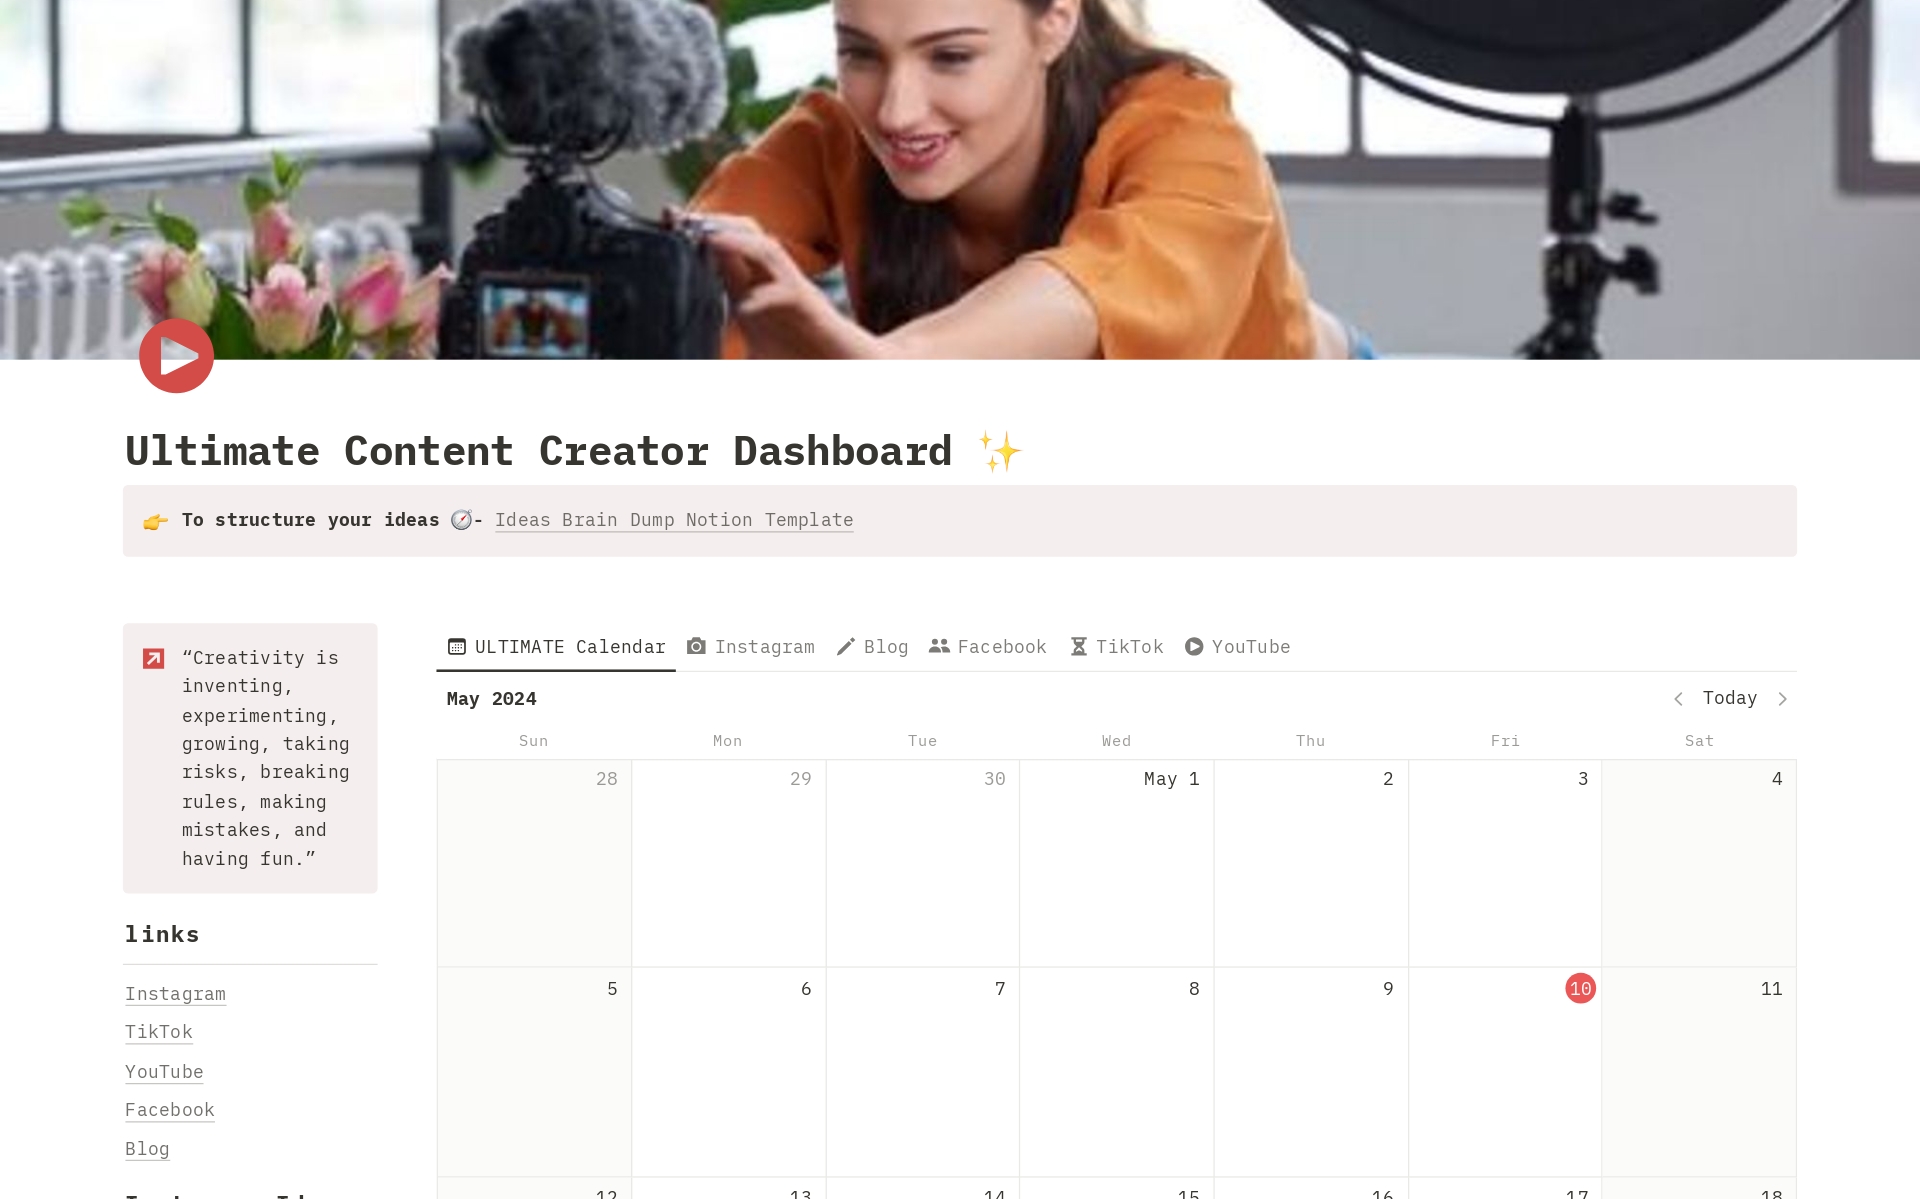 Planning your content should not be hard. From idea to execution to results, make everything flawless and organized with NOTION CONTENT CREATOR DASHBOARD.